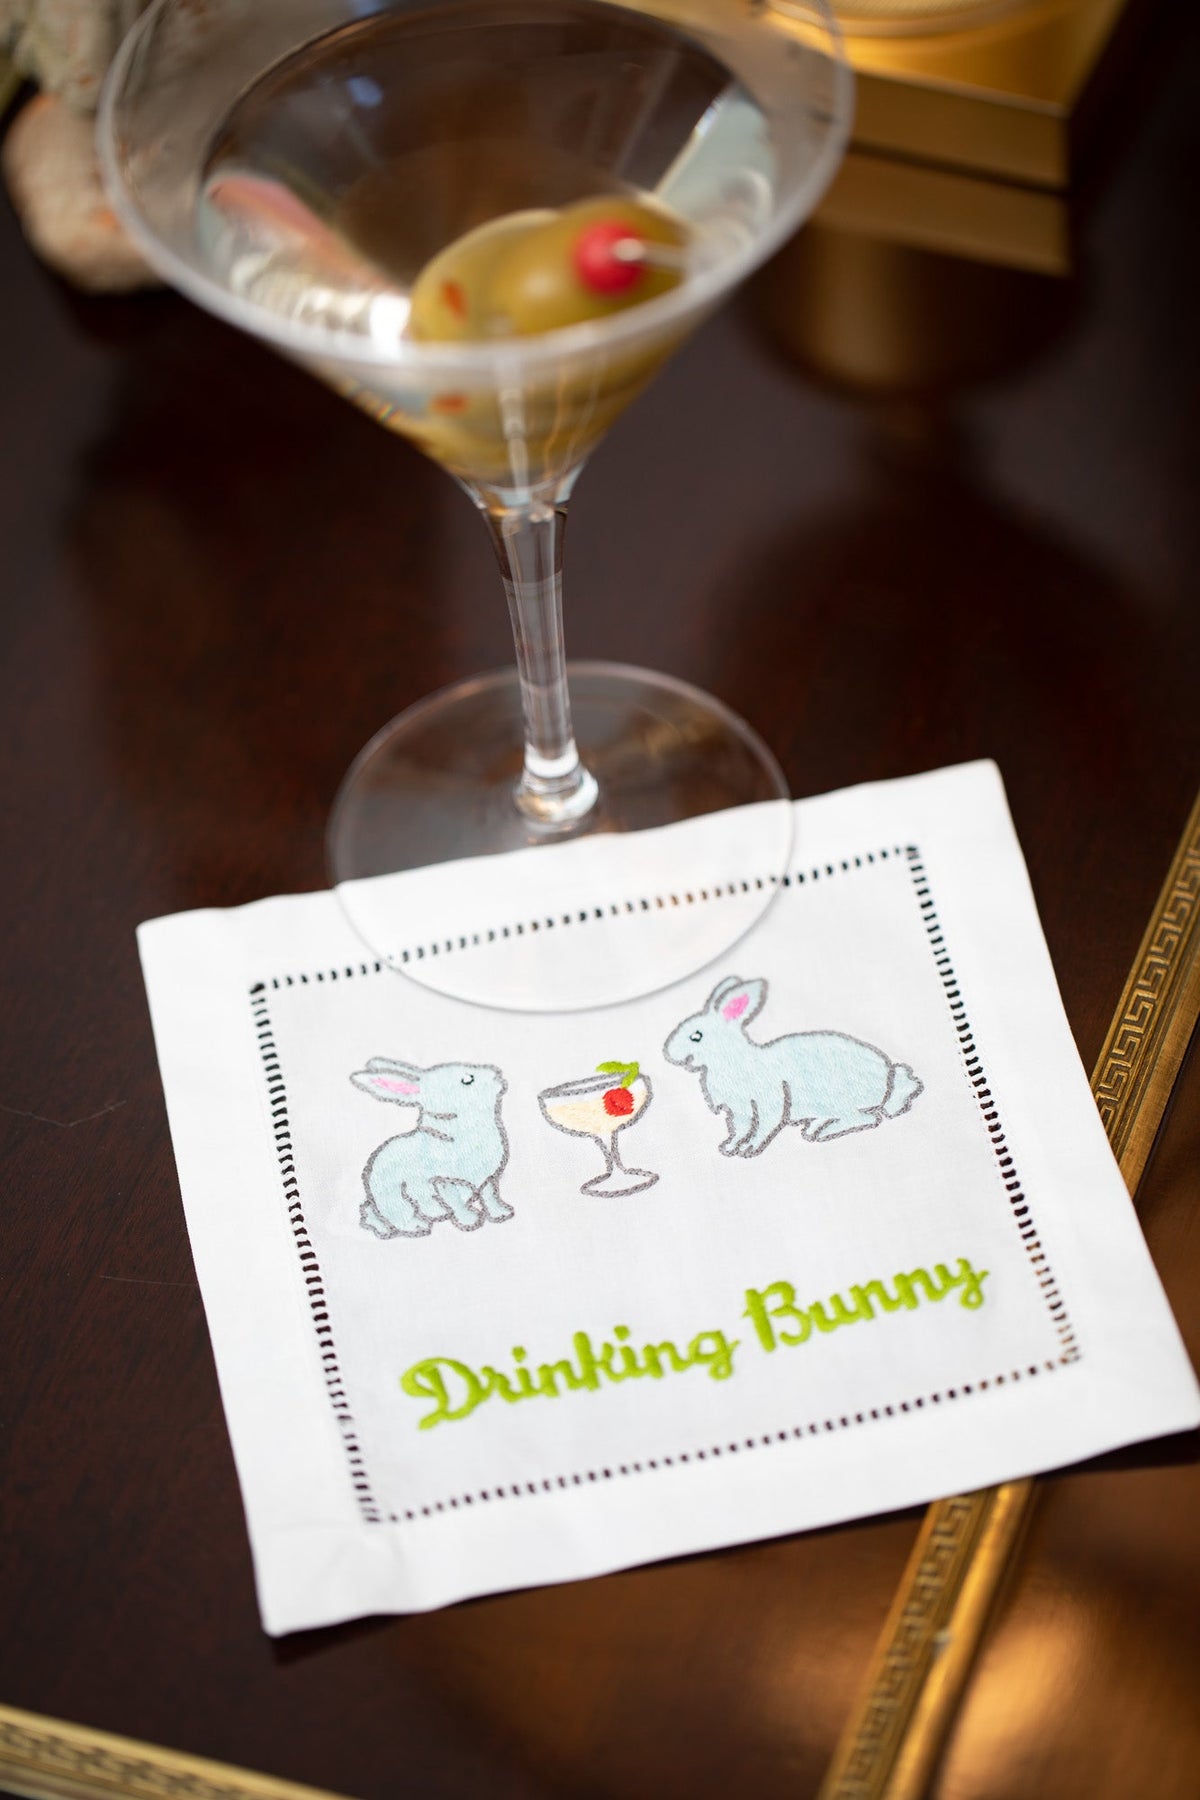 Drinking Bunny Cocktail Napkins, Set of 4